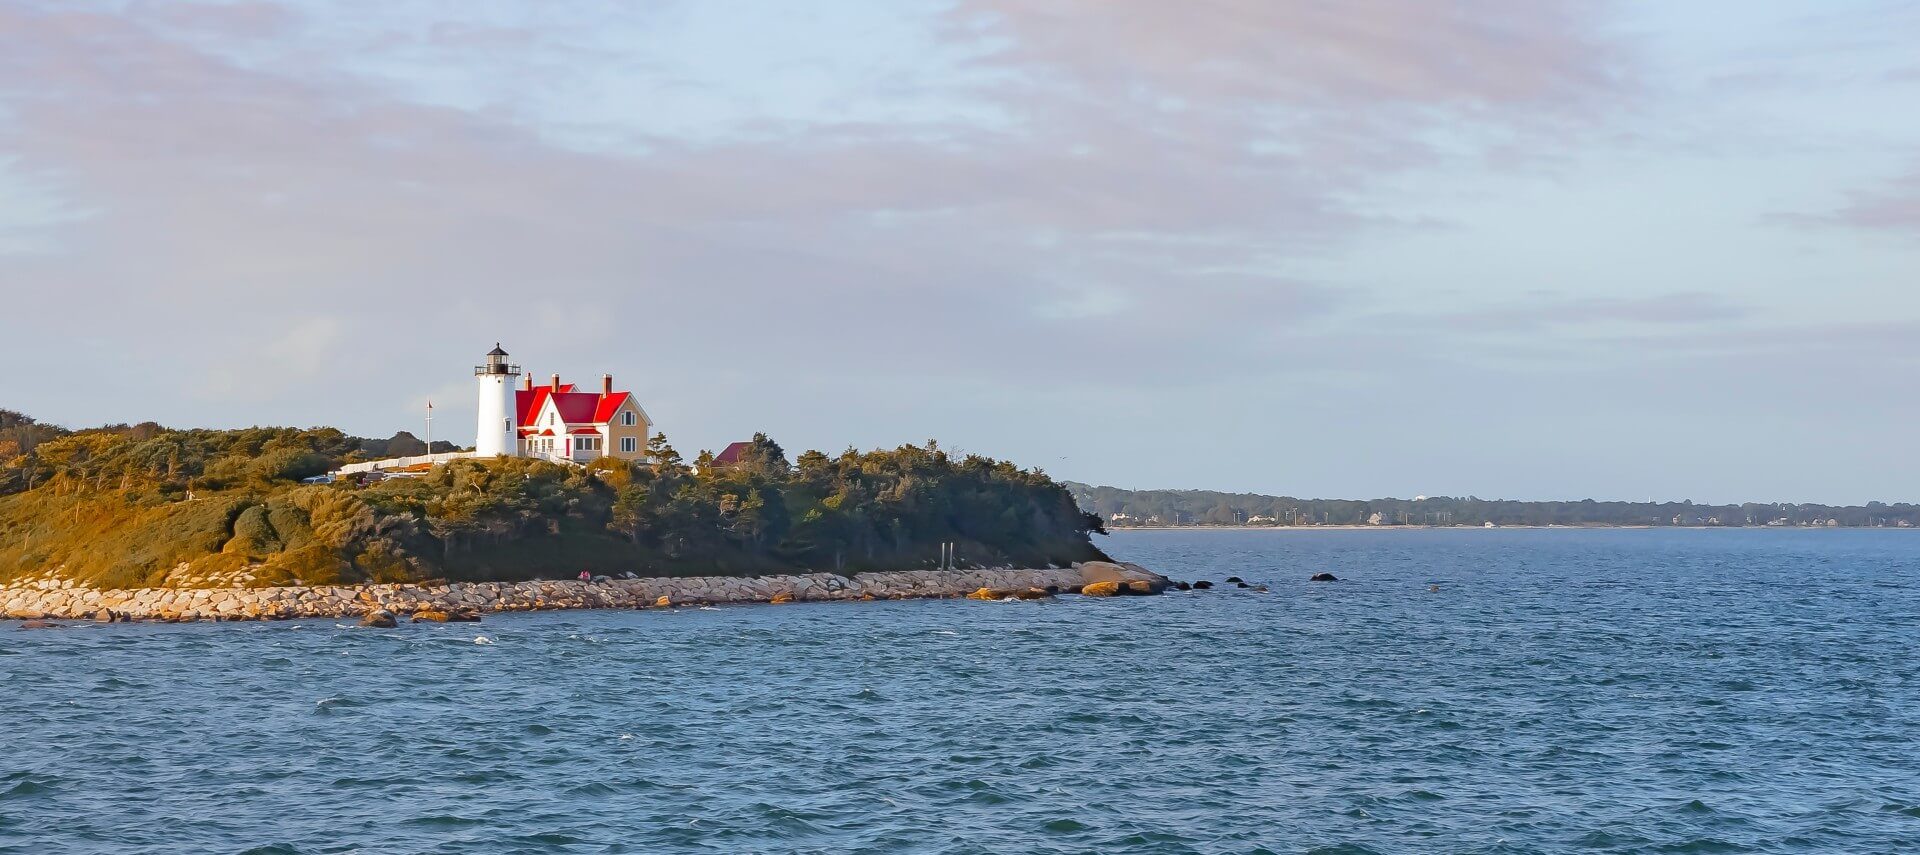 A red and white lighthouse building on a peninsula surrounded by water